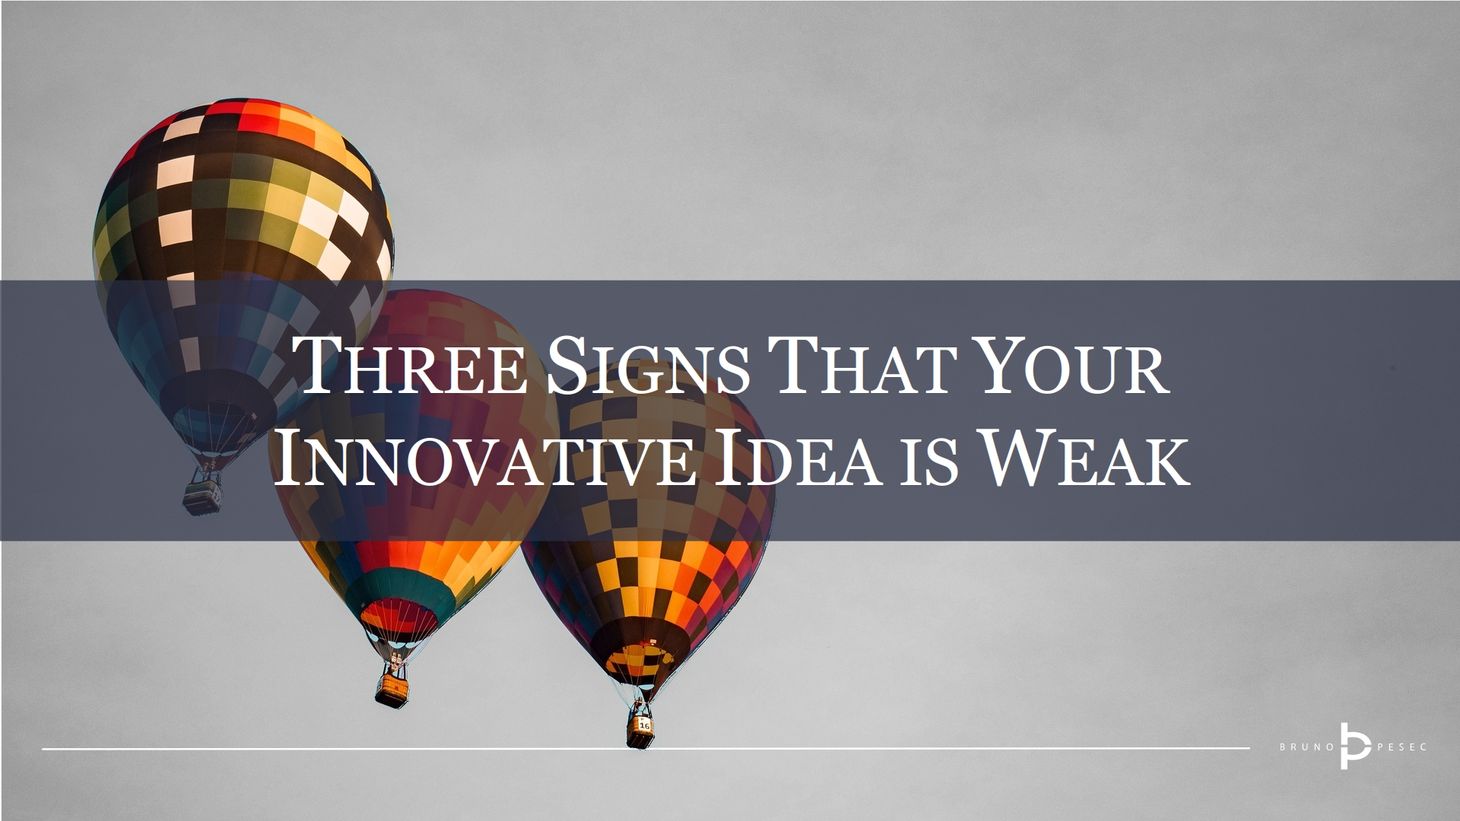 Three signs that your innovative idea is weak